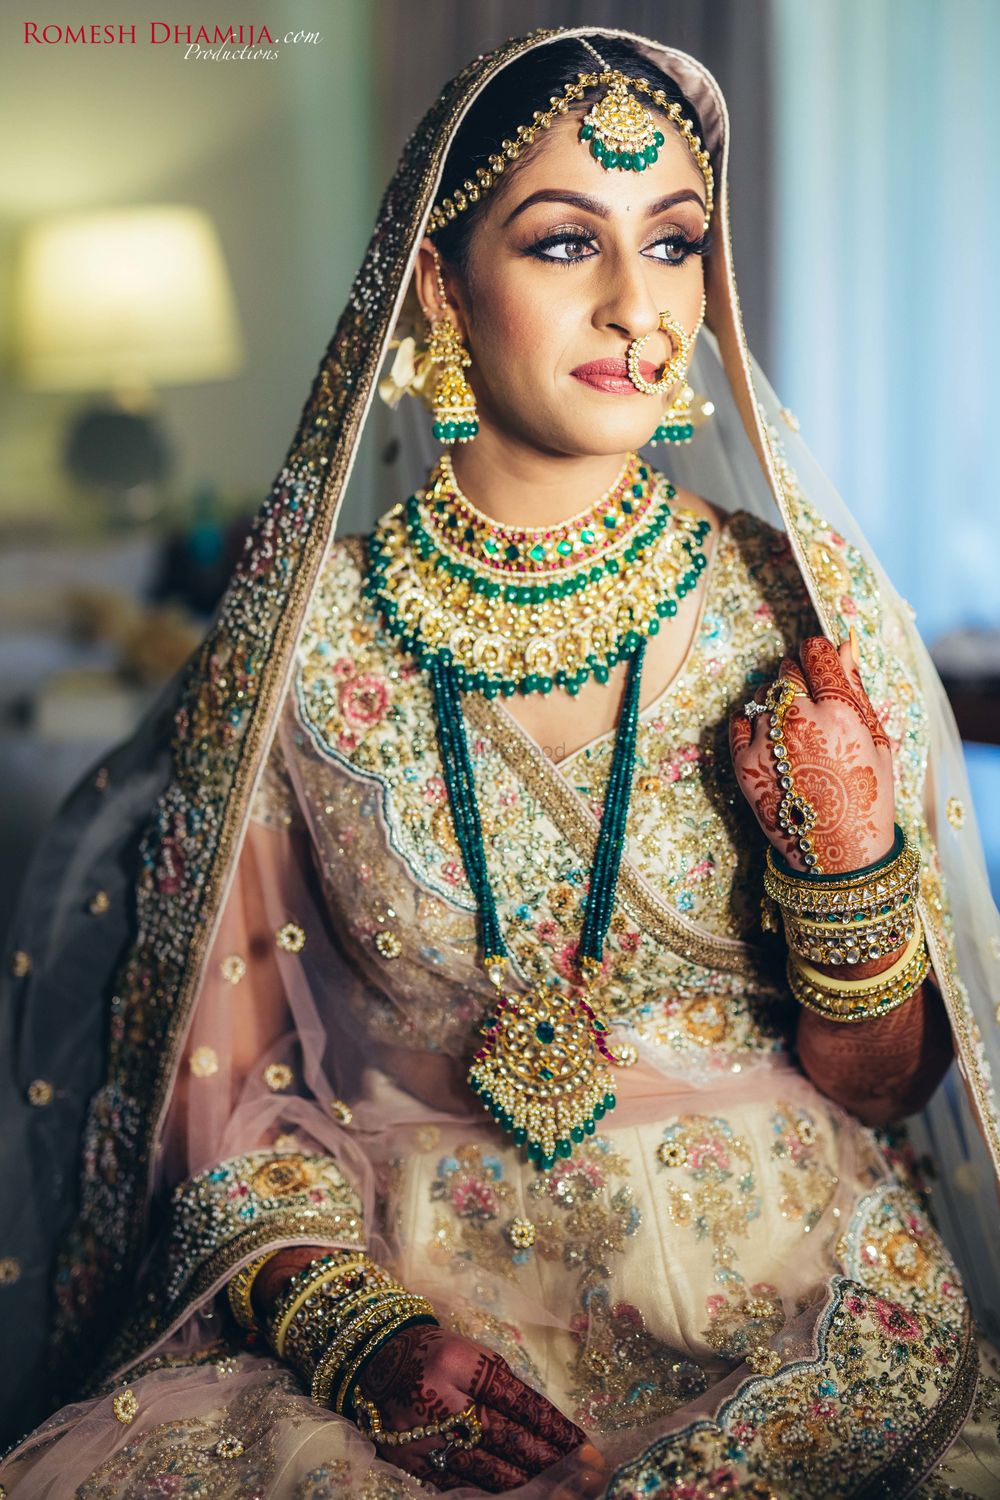 Photo of Sabyasachi bride with layered contrasting jewellery